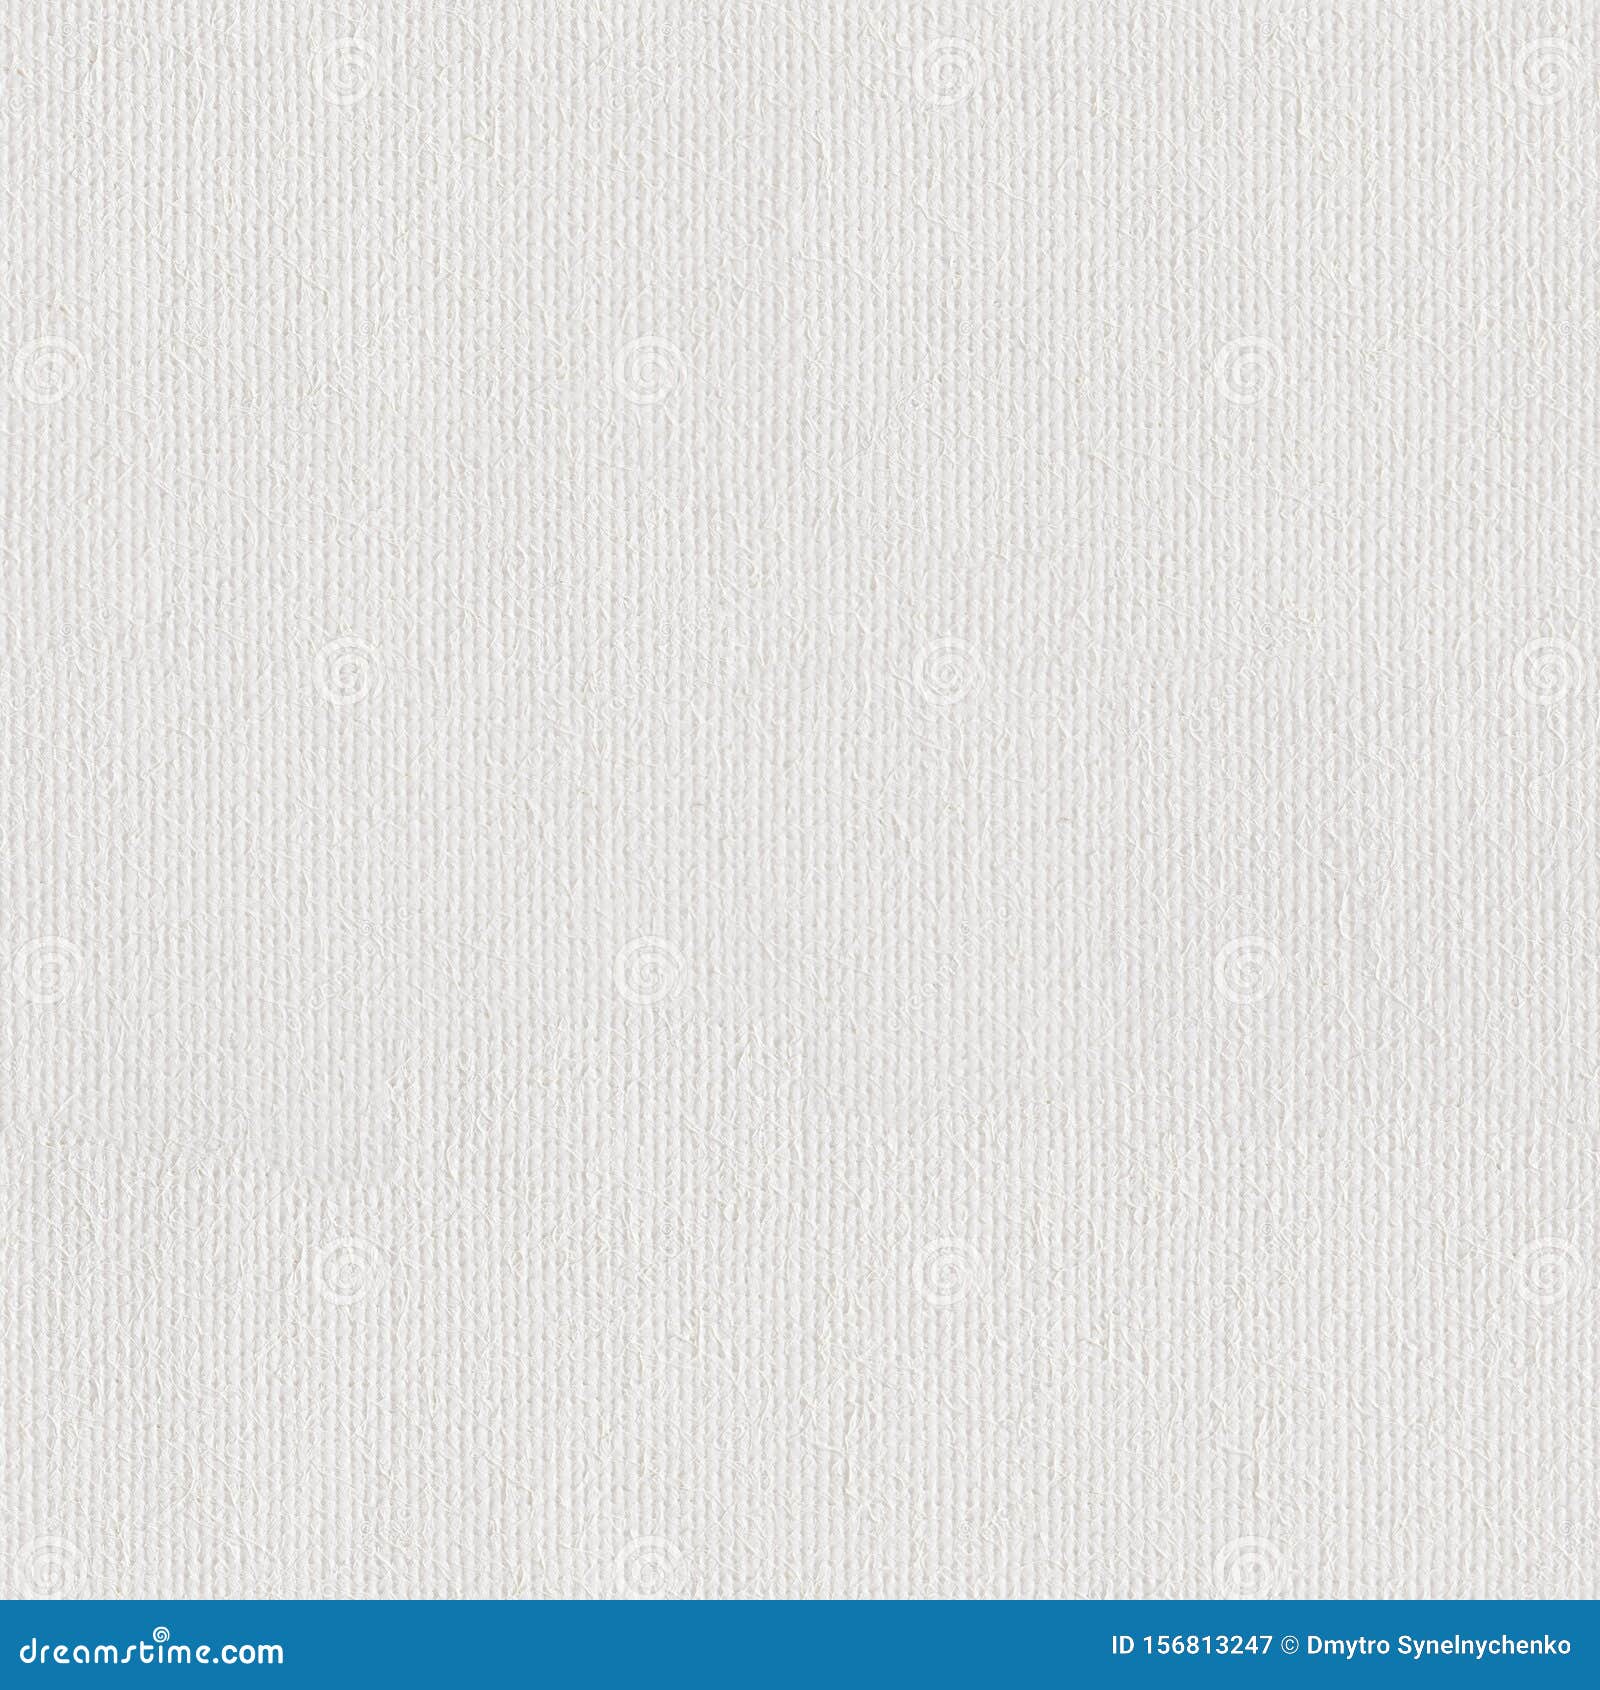 Canvas Texture Coated by White Primer. Seamless Square Texture